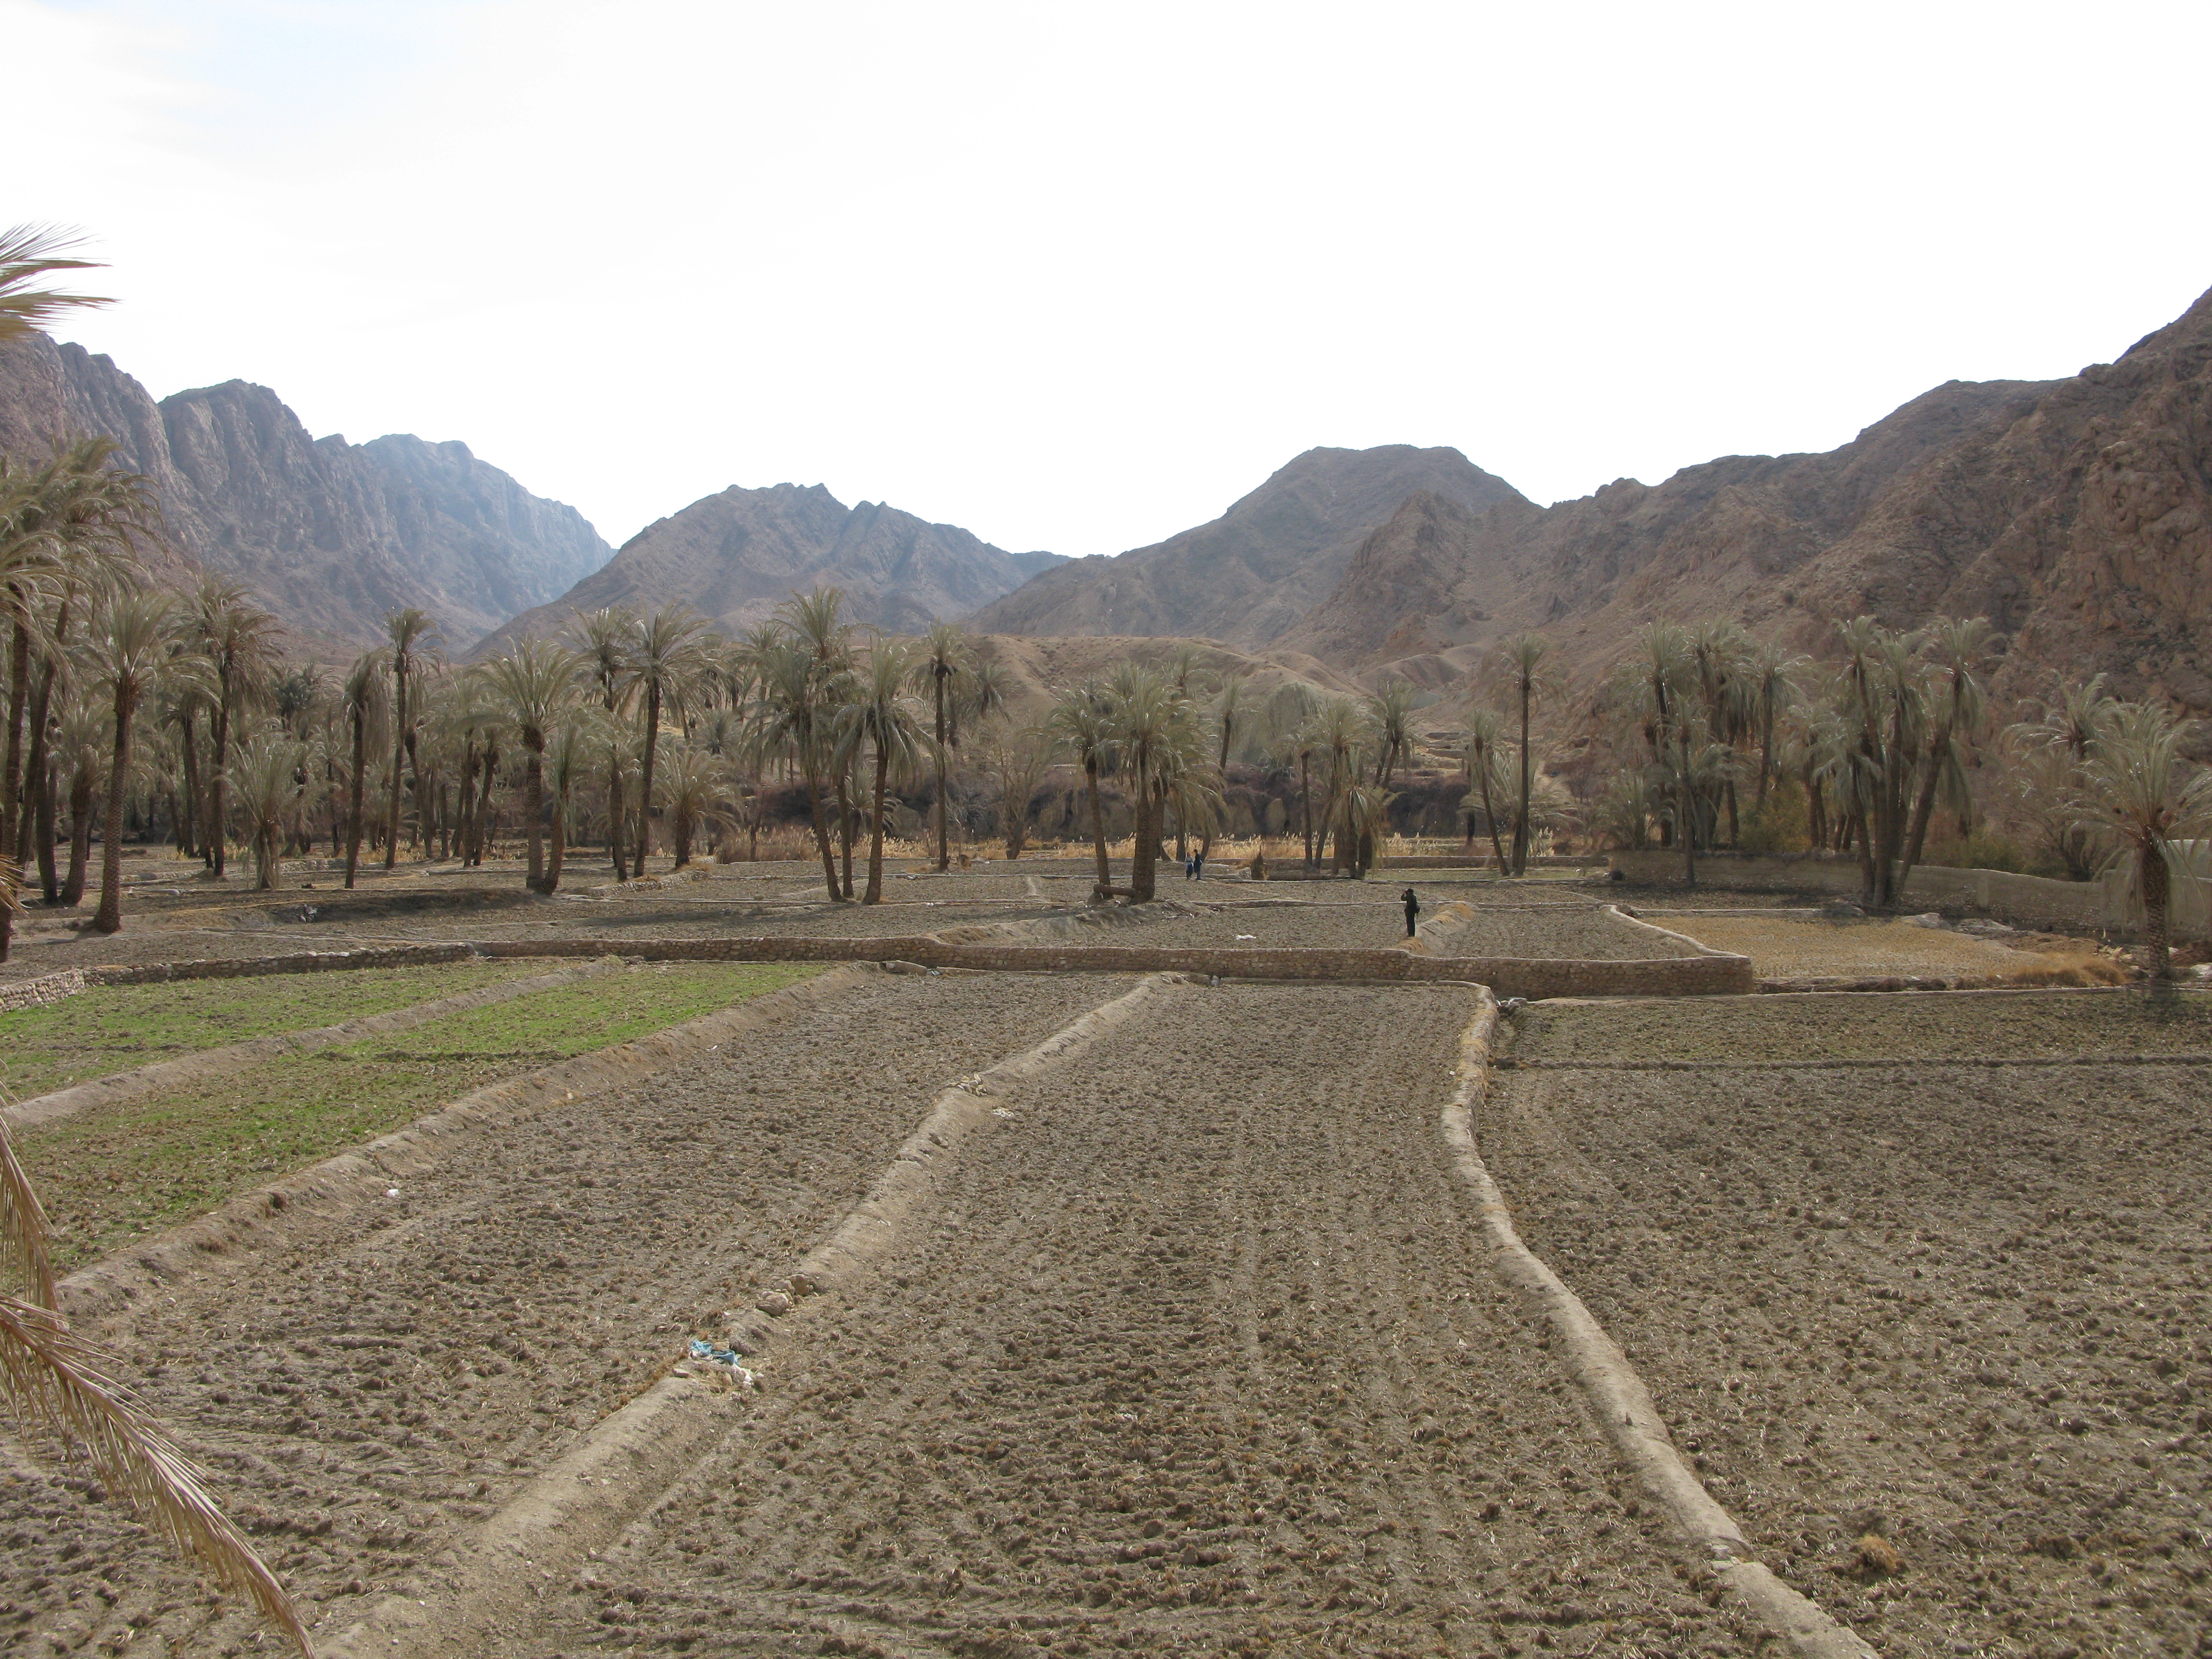 Rice field in Azmighan